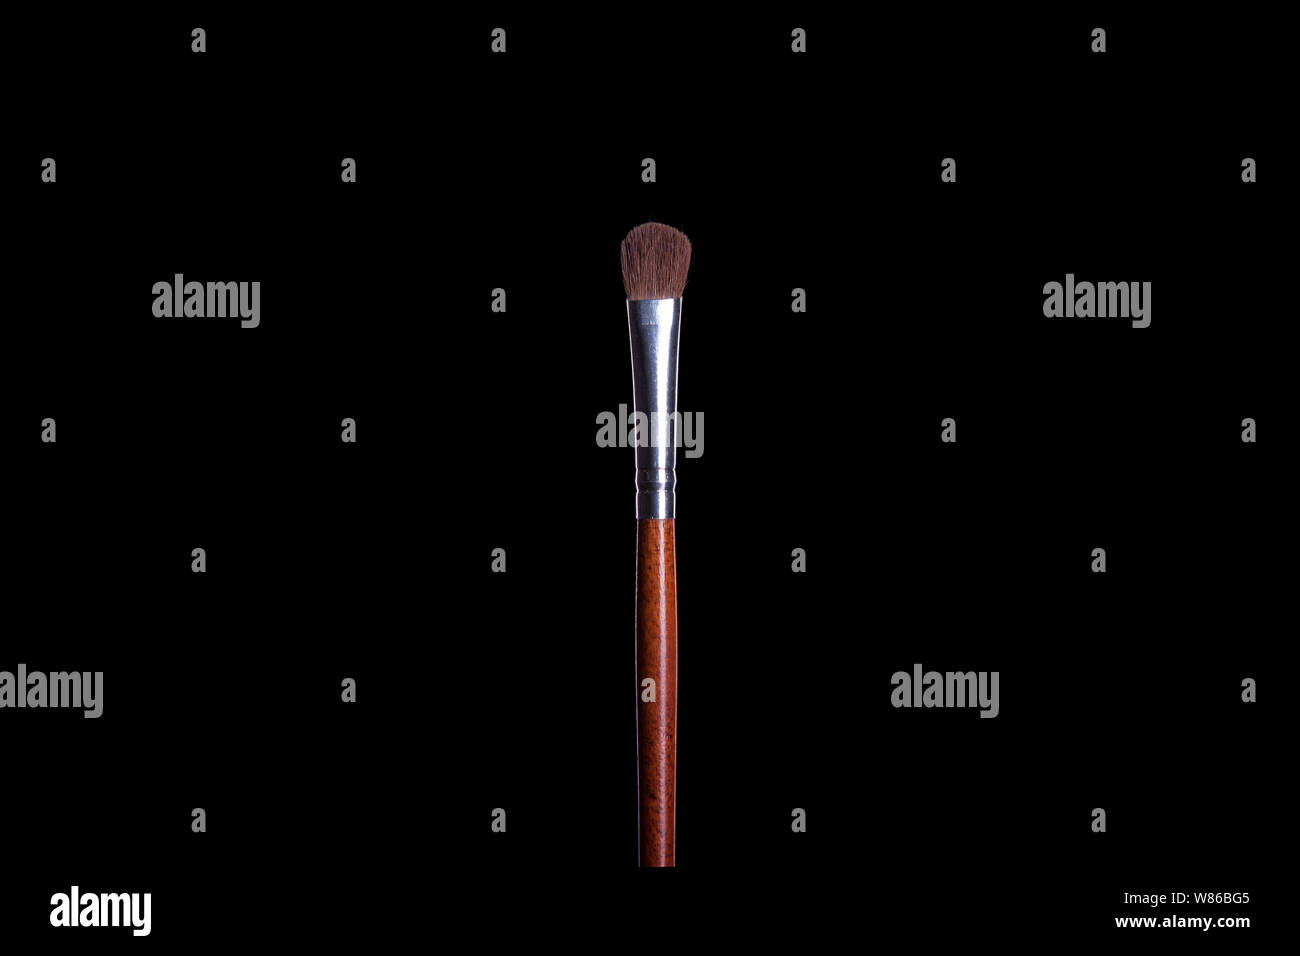 Makeup brush, professional face beauty tool, isolate on black background Stock Photo